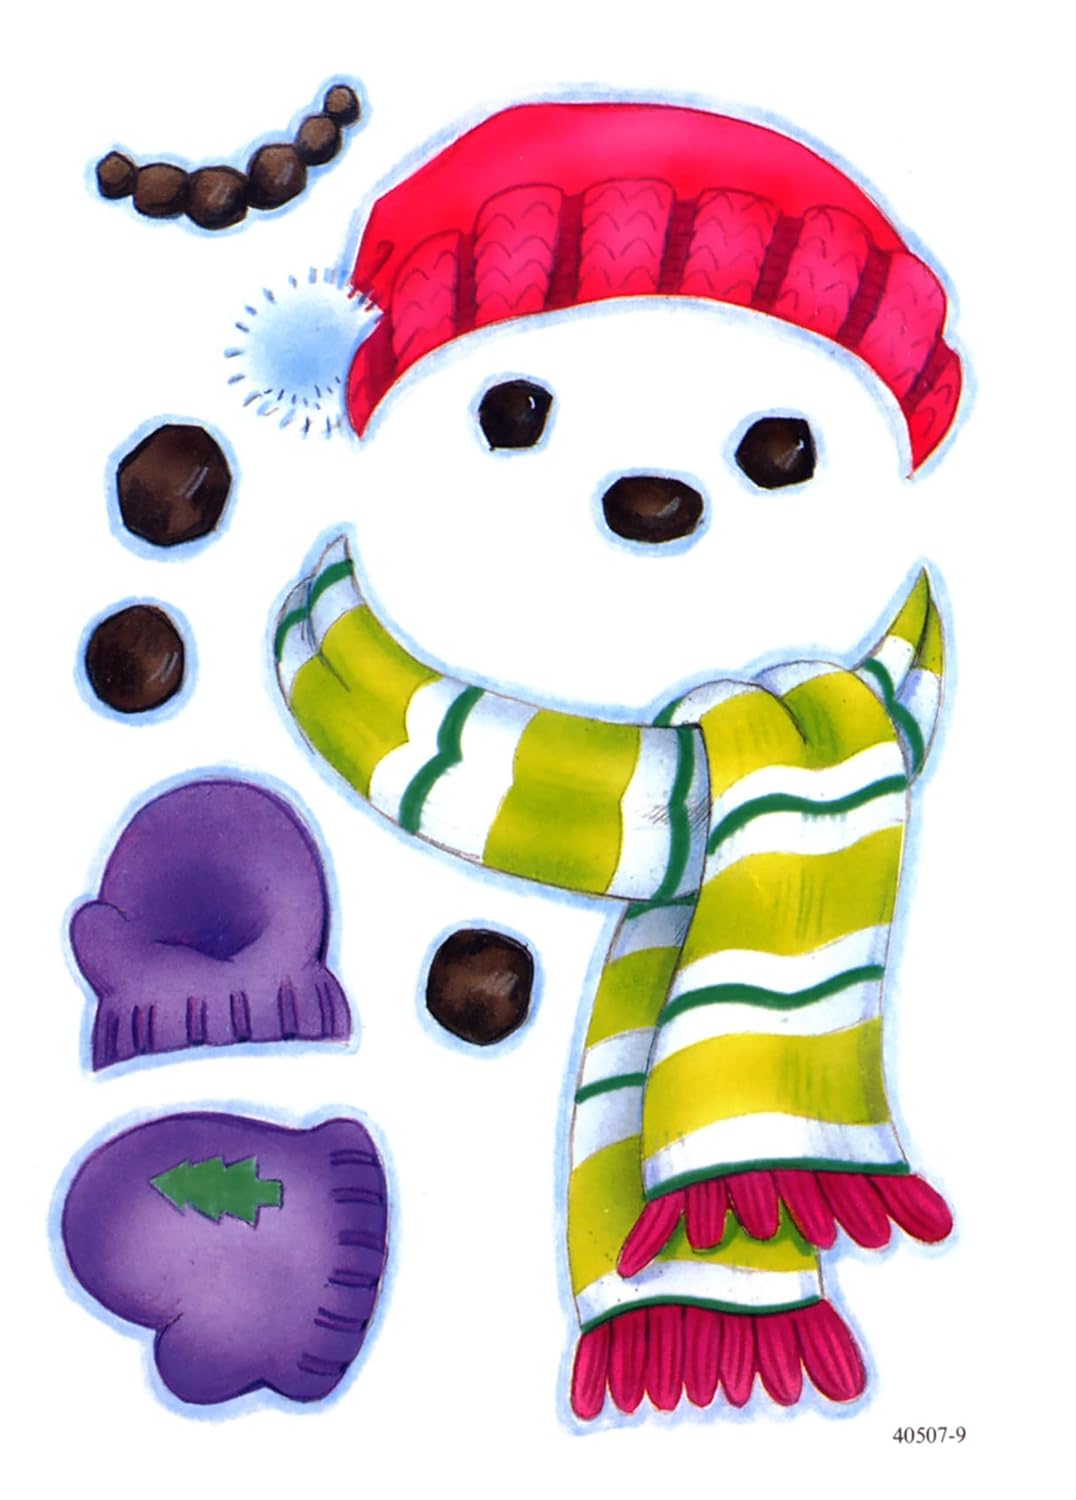 Decorate a Snowman with 35 Stickers